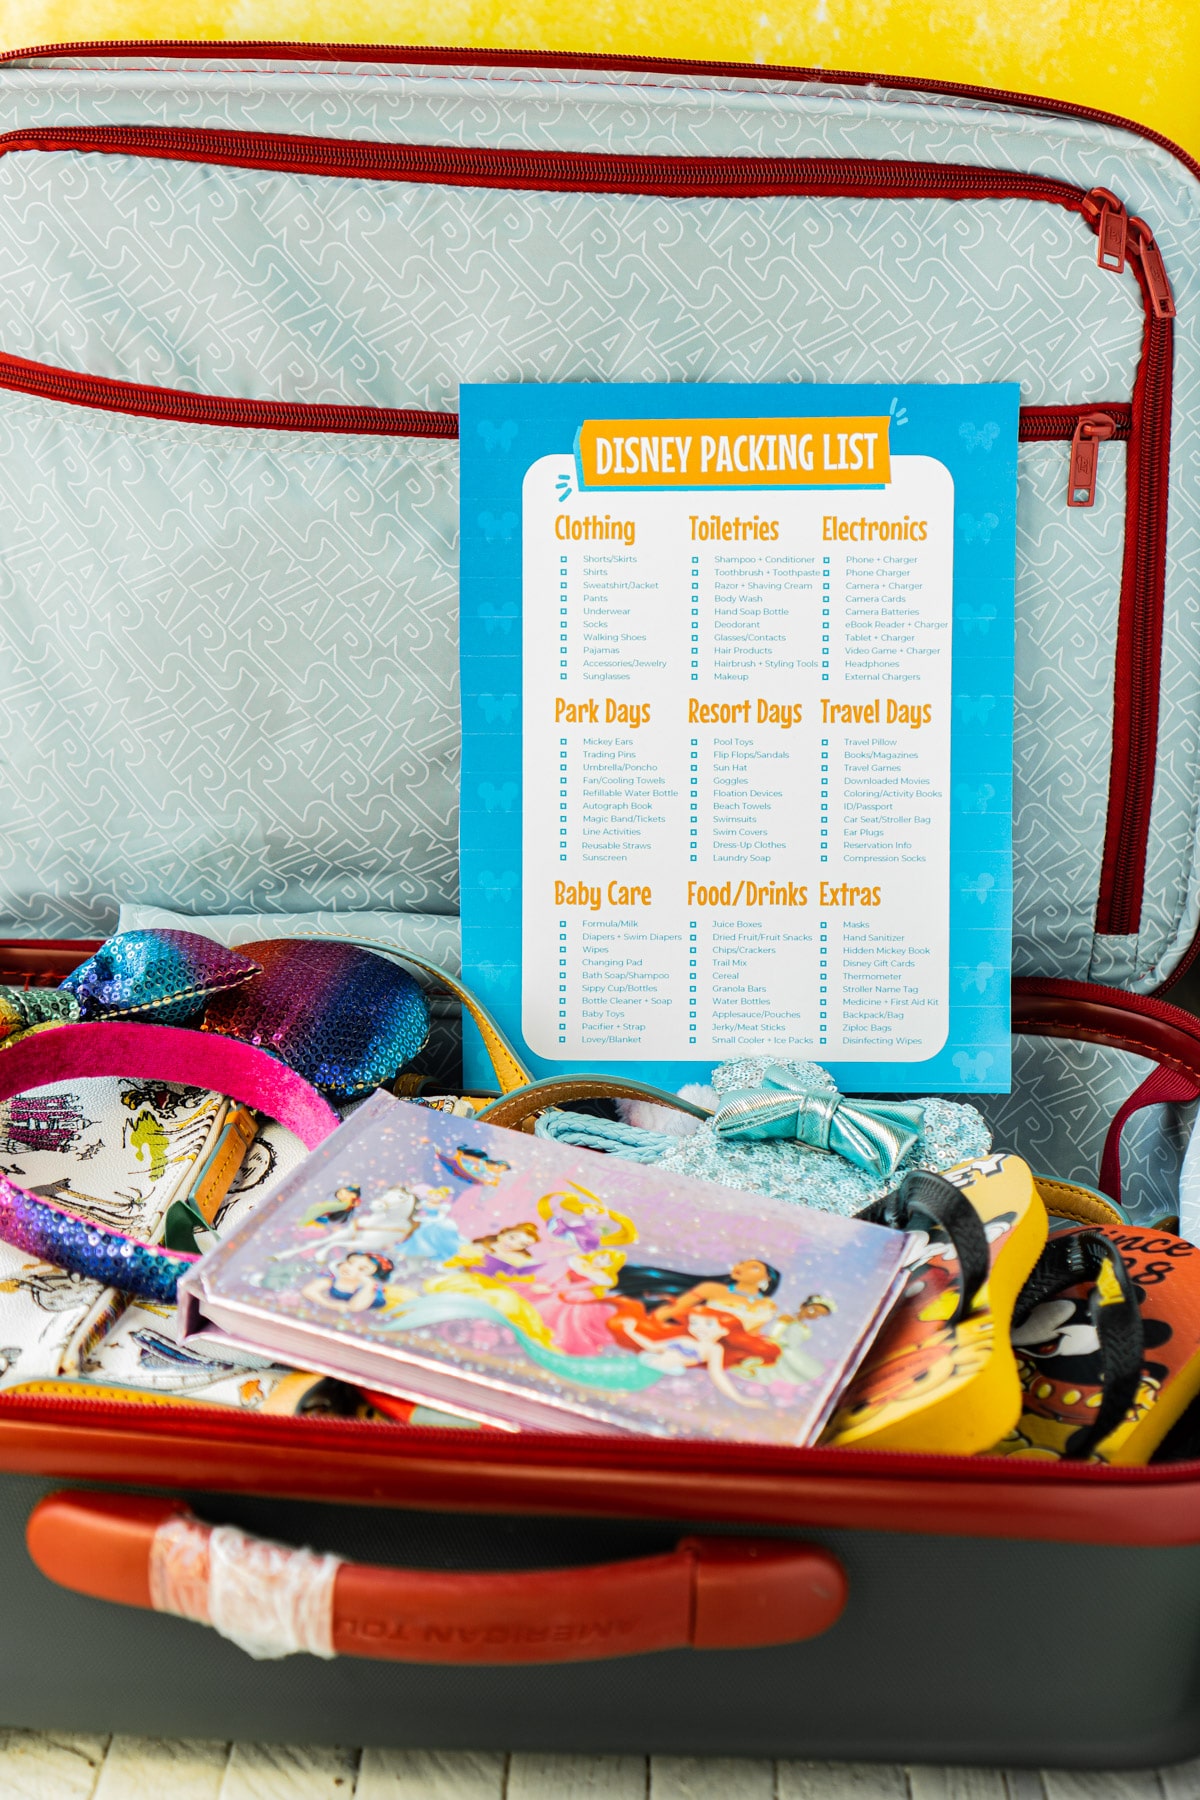 Disney packing list on top of a suitcase full of Disney items